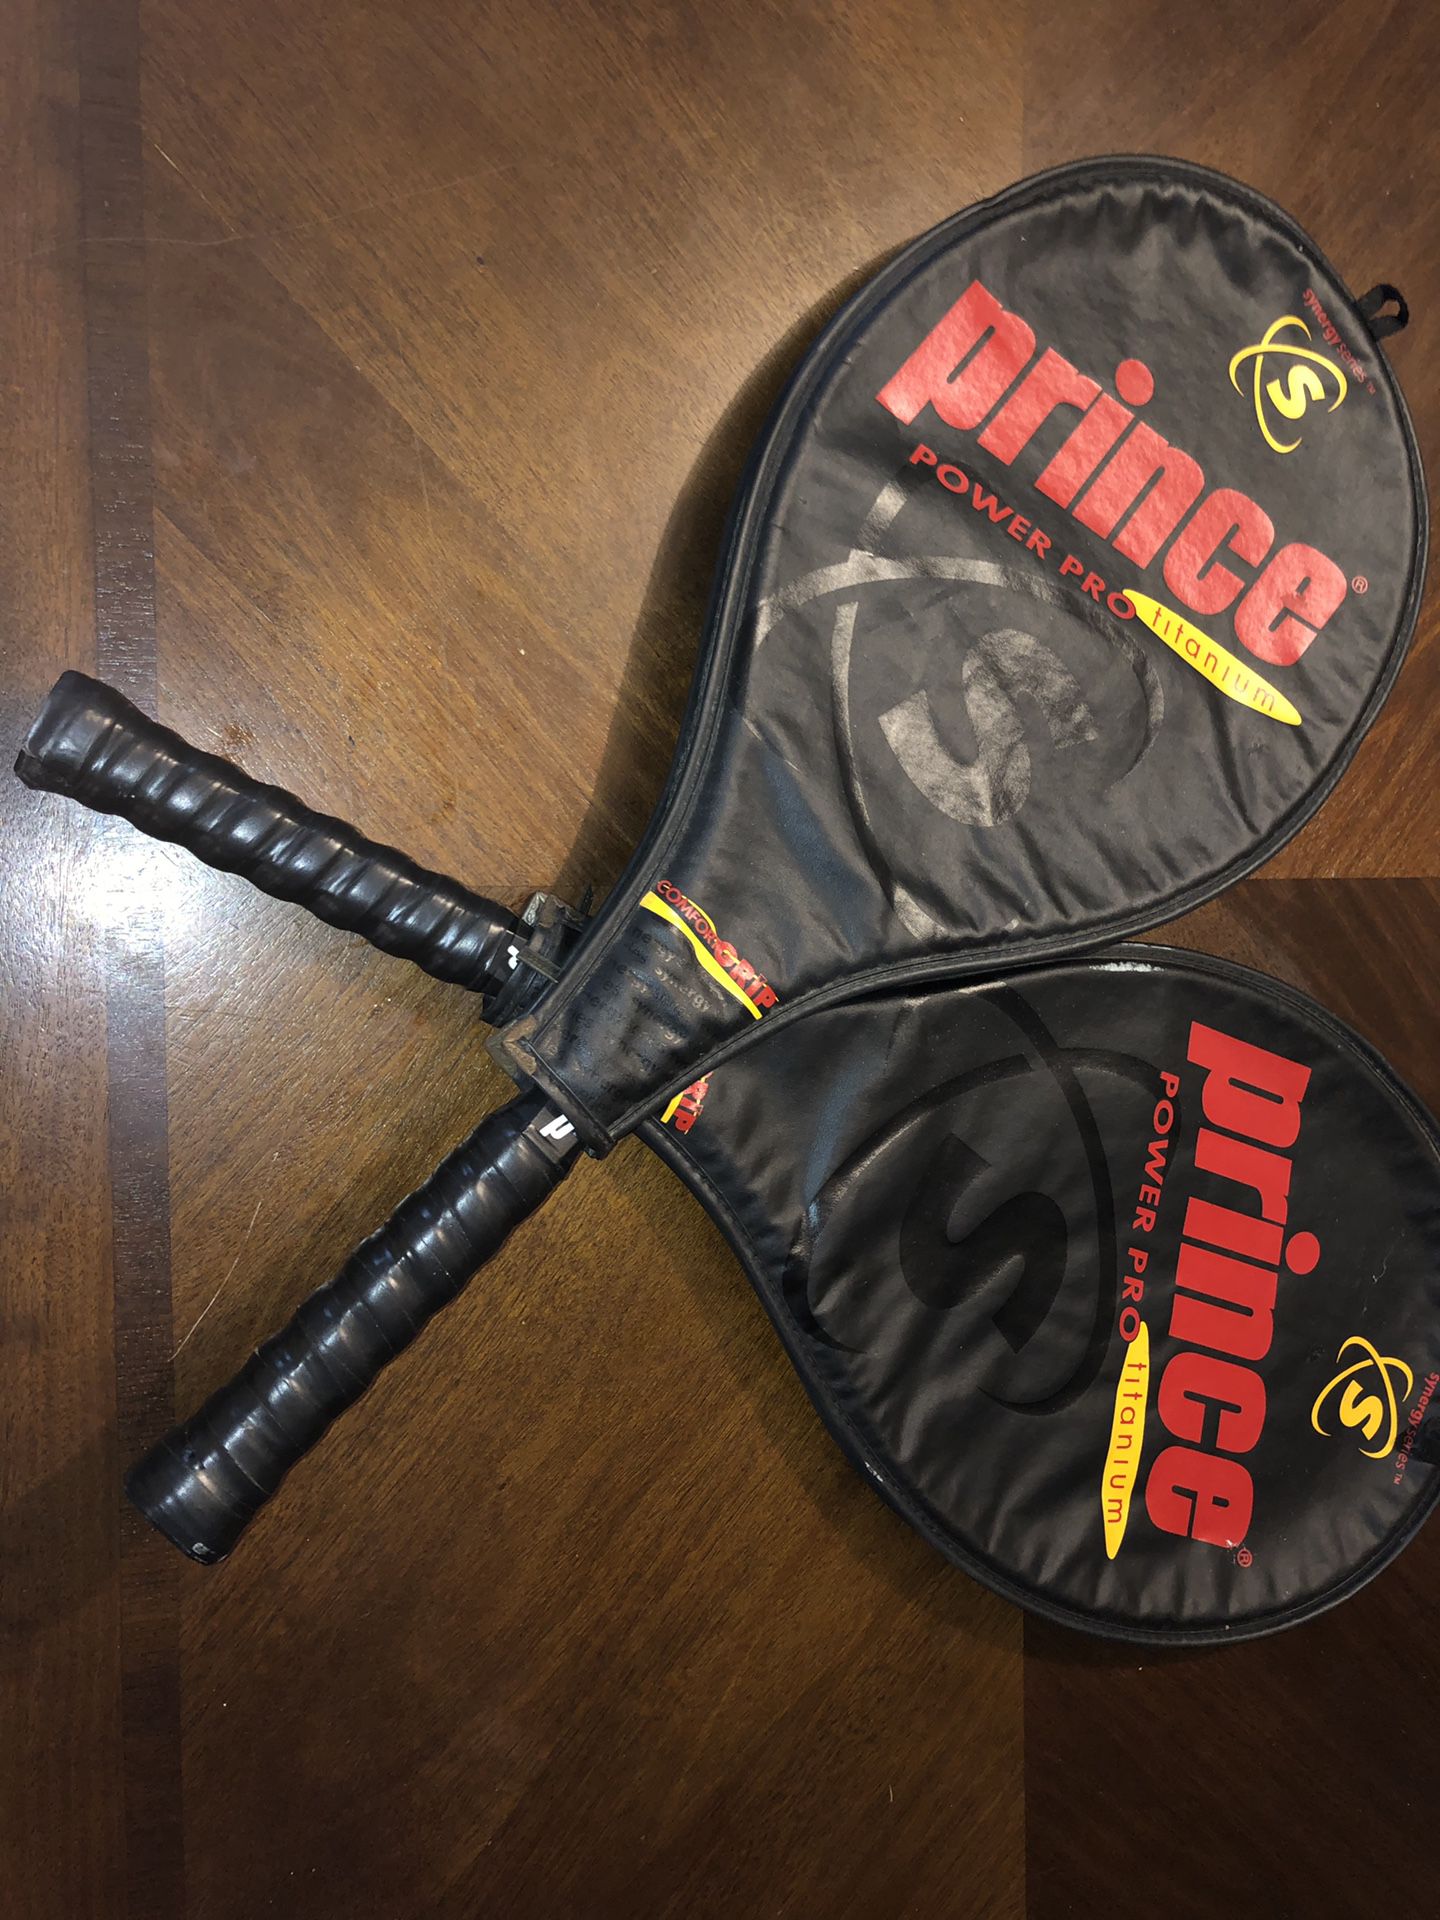 2 Prince Synergy Series Power Pro Titanium 27" Tennis Racket with cover